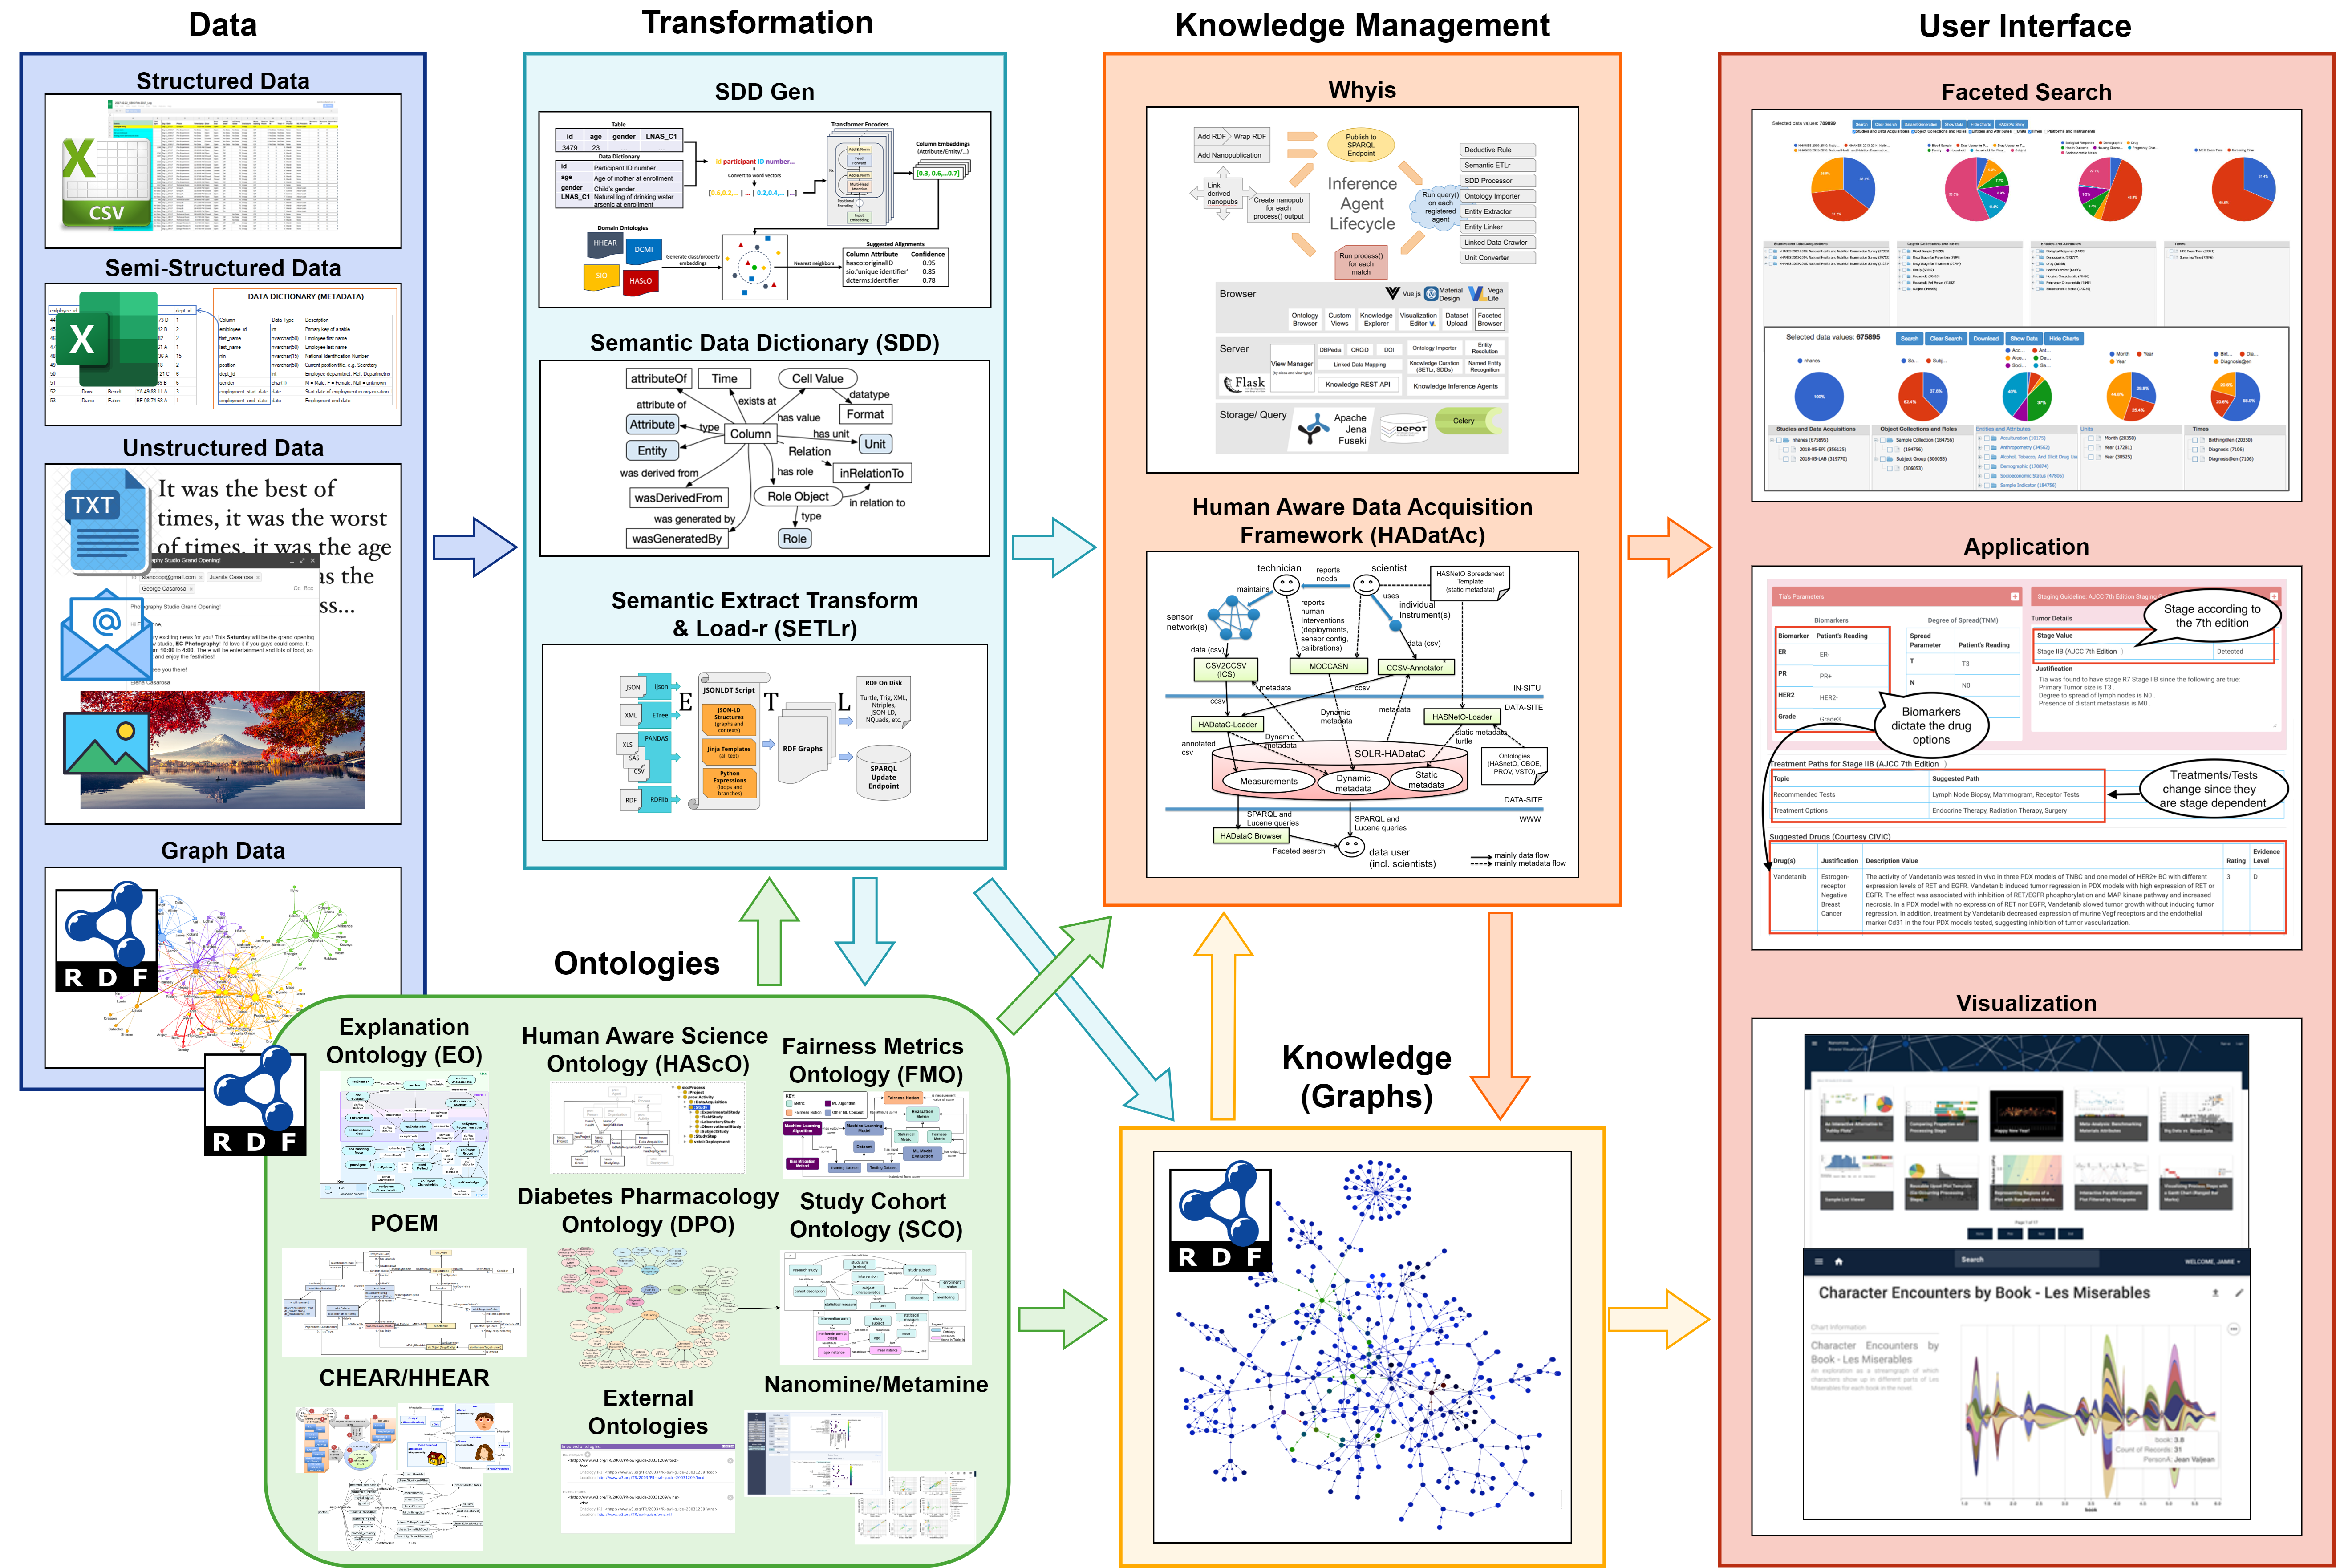 The Tetherless World Constellations collection of tools and methods contributes to a complete semantic scientific ecosystem that supports data lifecycle components such as dissemination, transformation, management, investigation, and visualization.